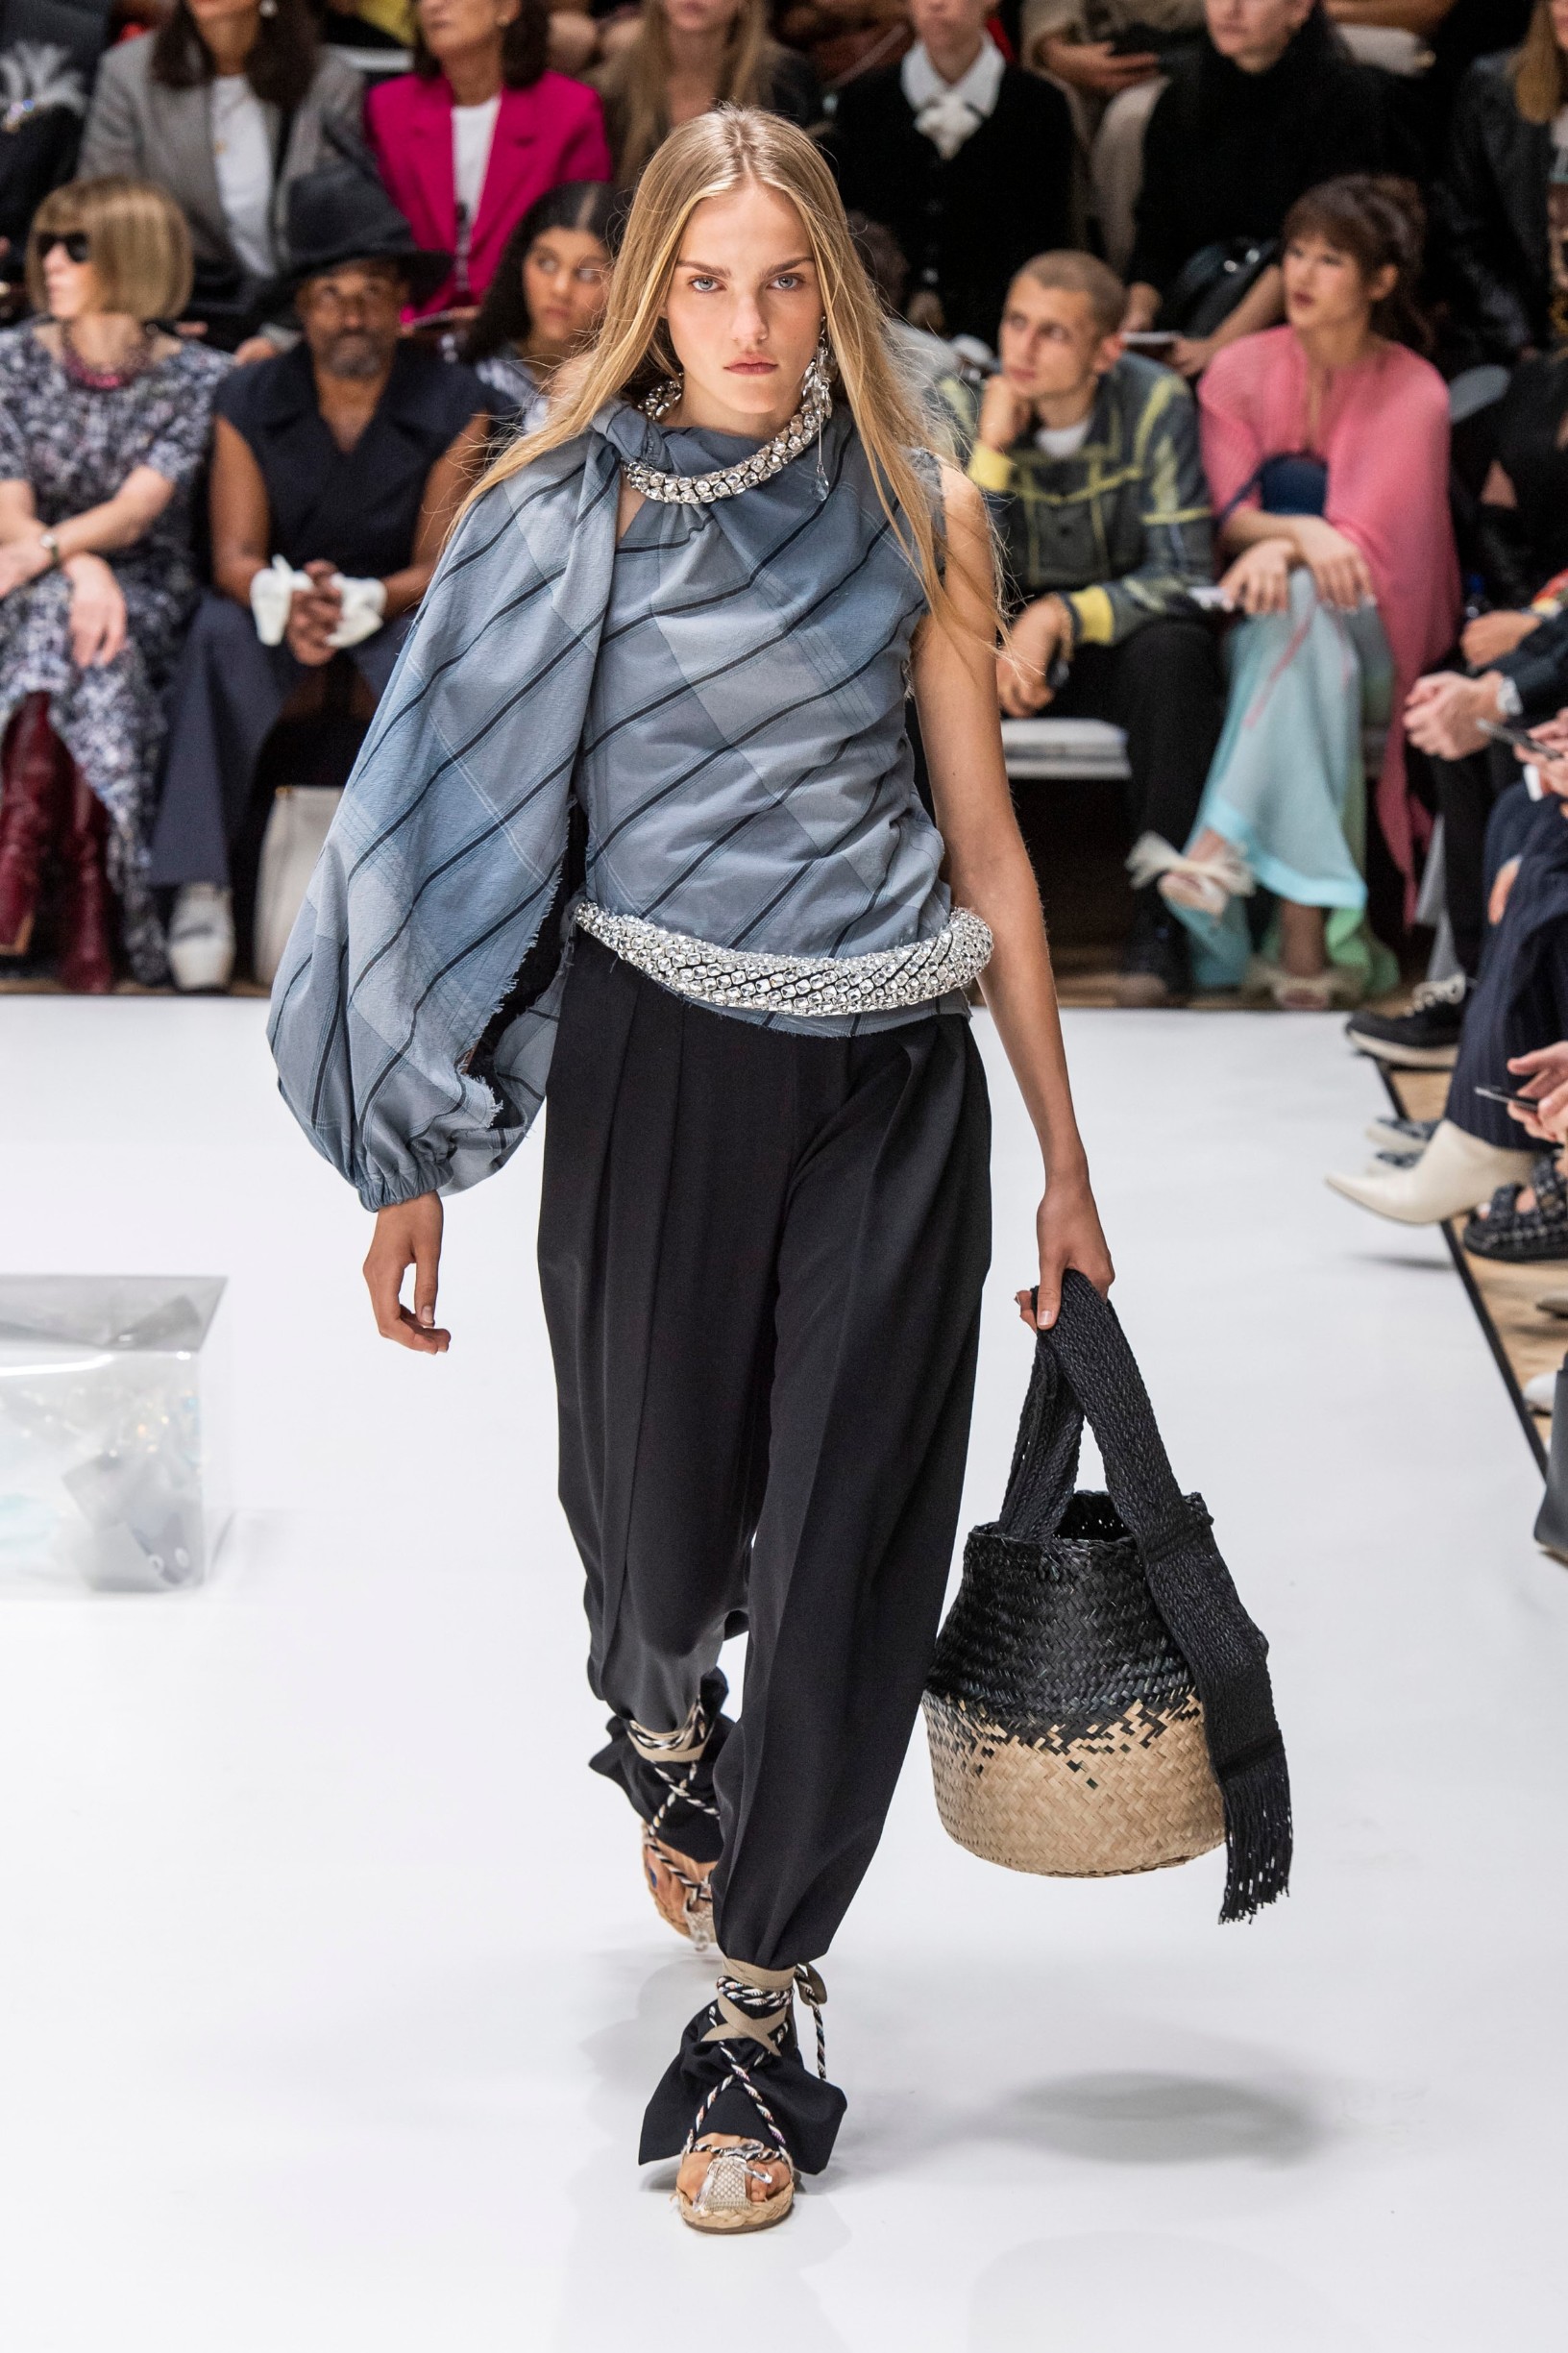 JW Anderson
Spring Summer 2020 Runway‎ fashion show
London Fashion Week,  England, UK in September 2019., Image: 471469008, License: Rights-managed, Restrictions: , Model Release: no, Credit line: Rick Gold / Capital pictures / Profimedia